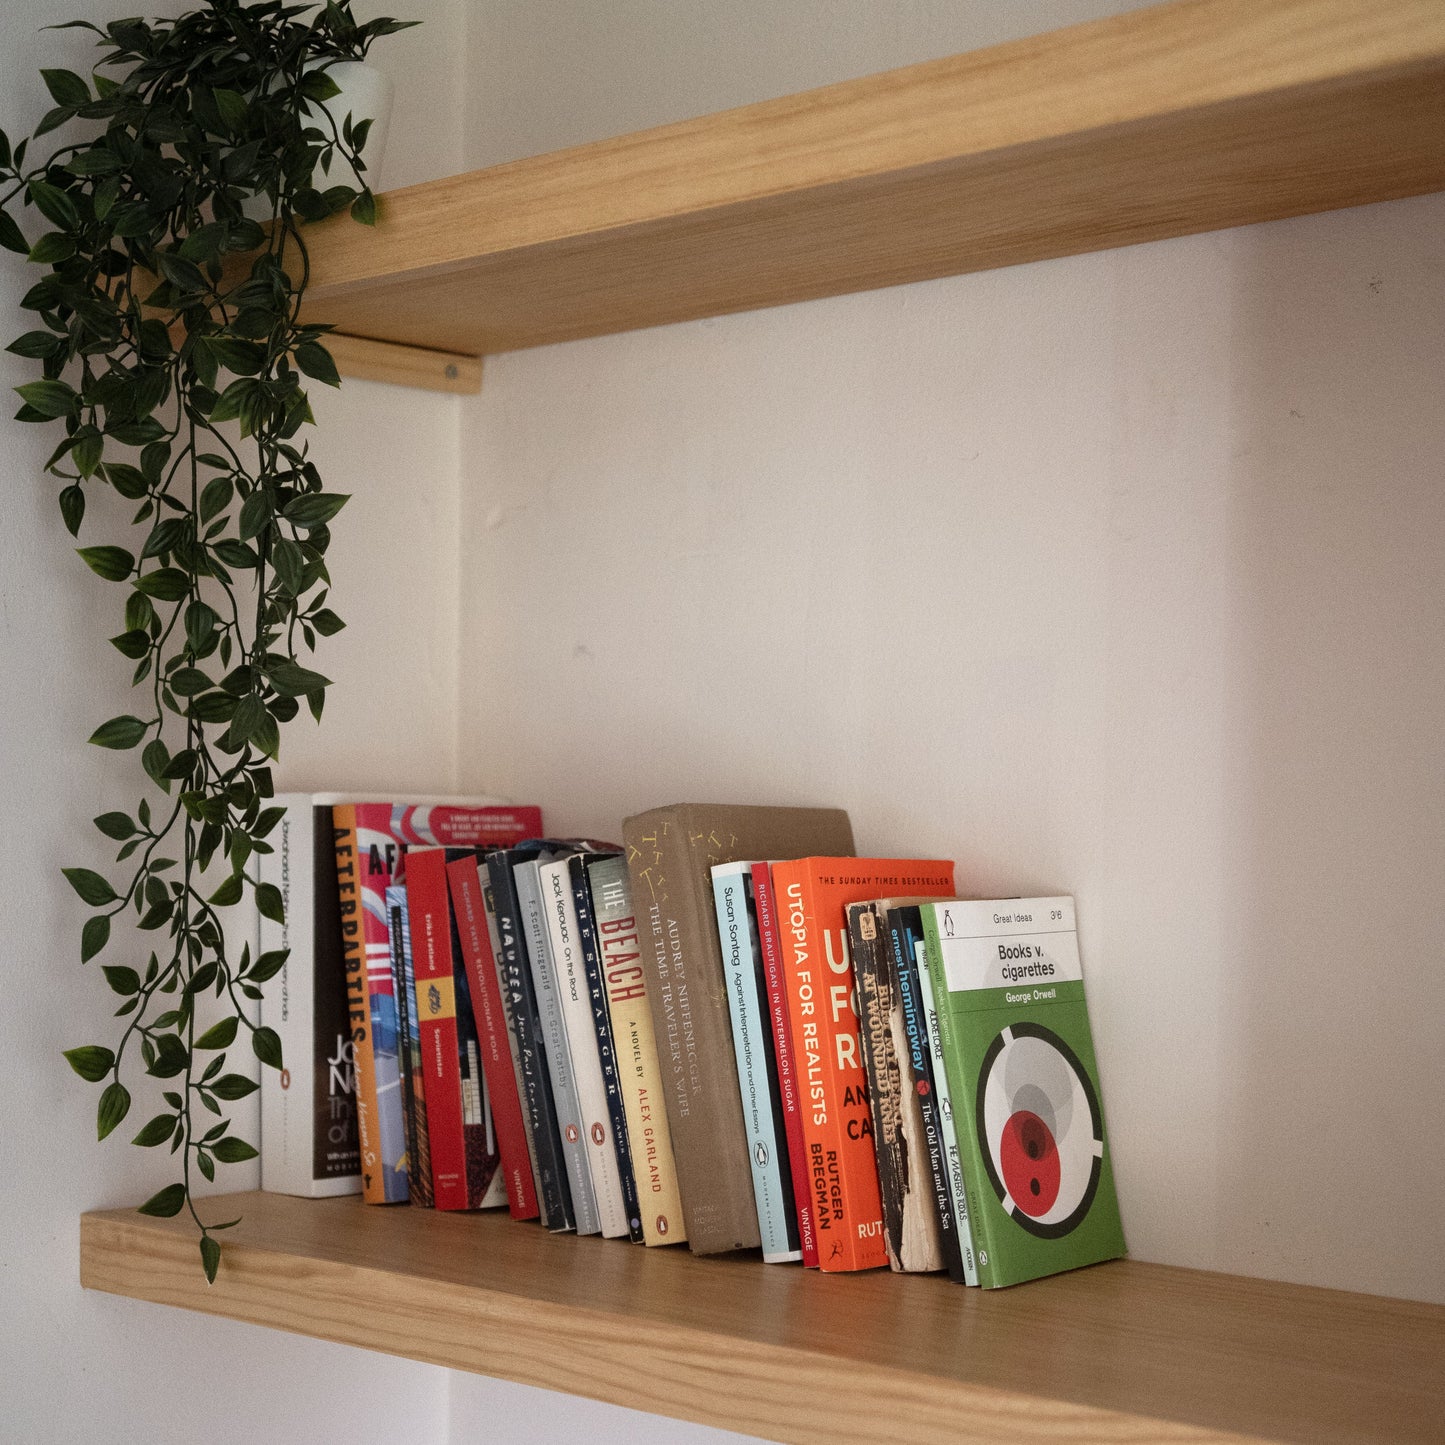 Solid Wood Alcove Floating Shelves - 98.5 cm by 47 cm